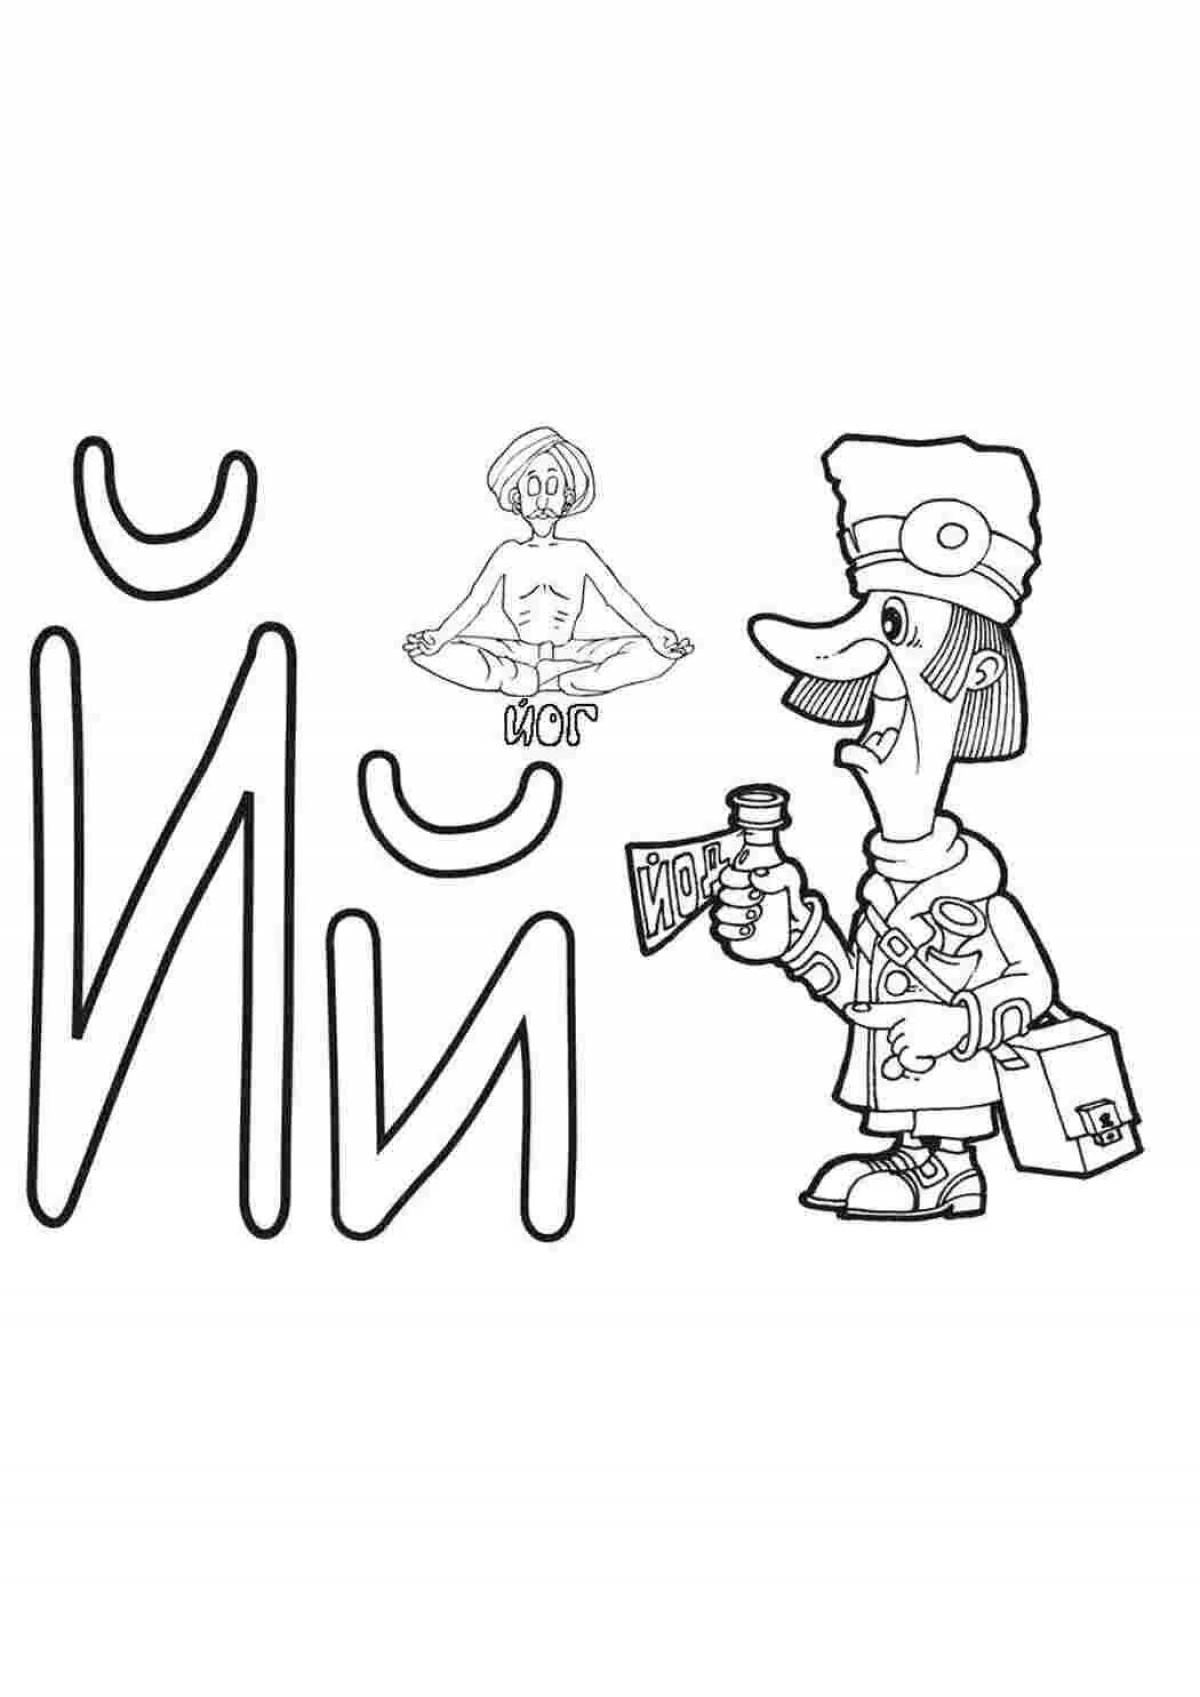 Colorful laura alphabet coloring page for kids everywhere